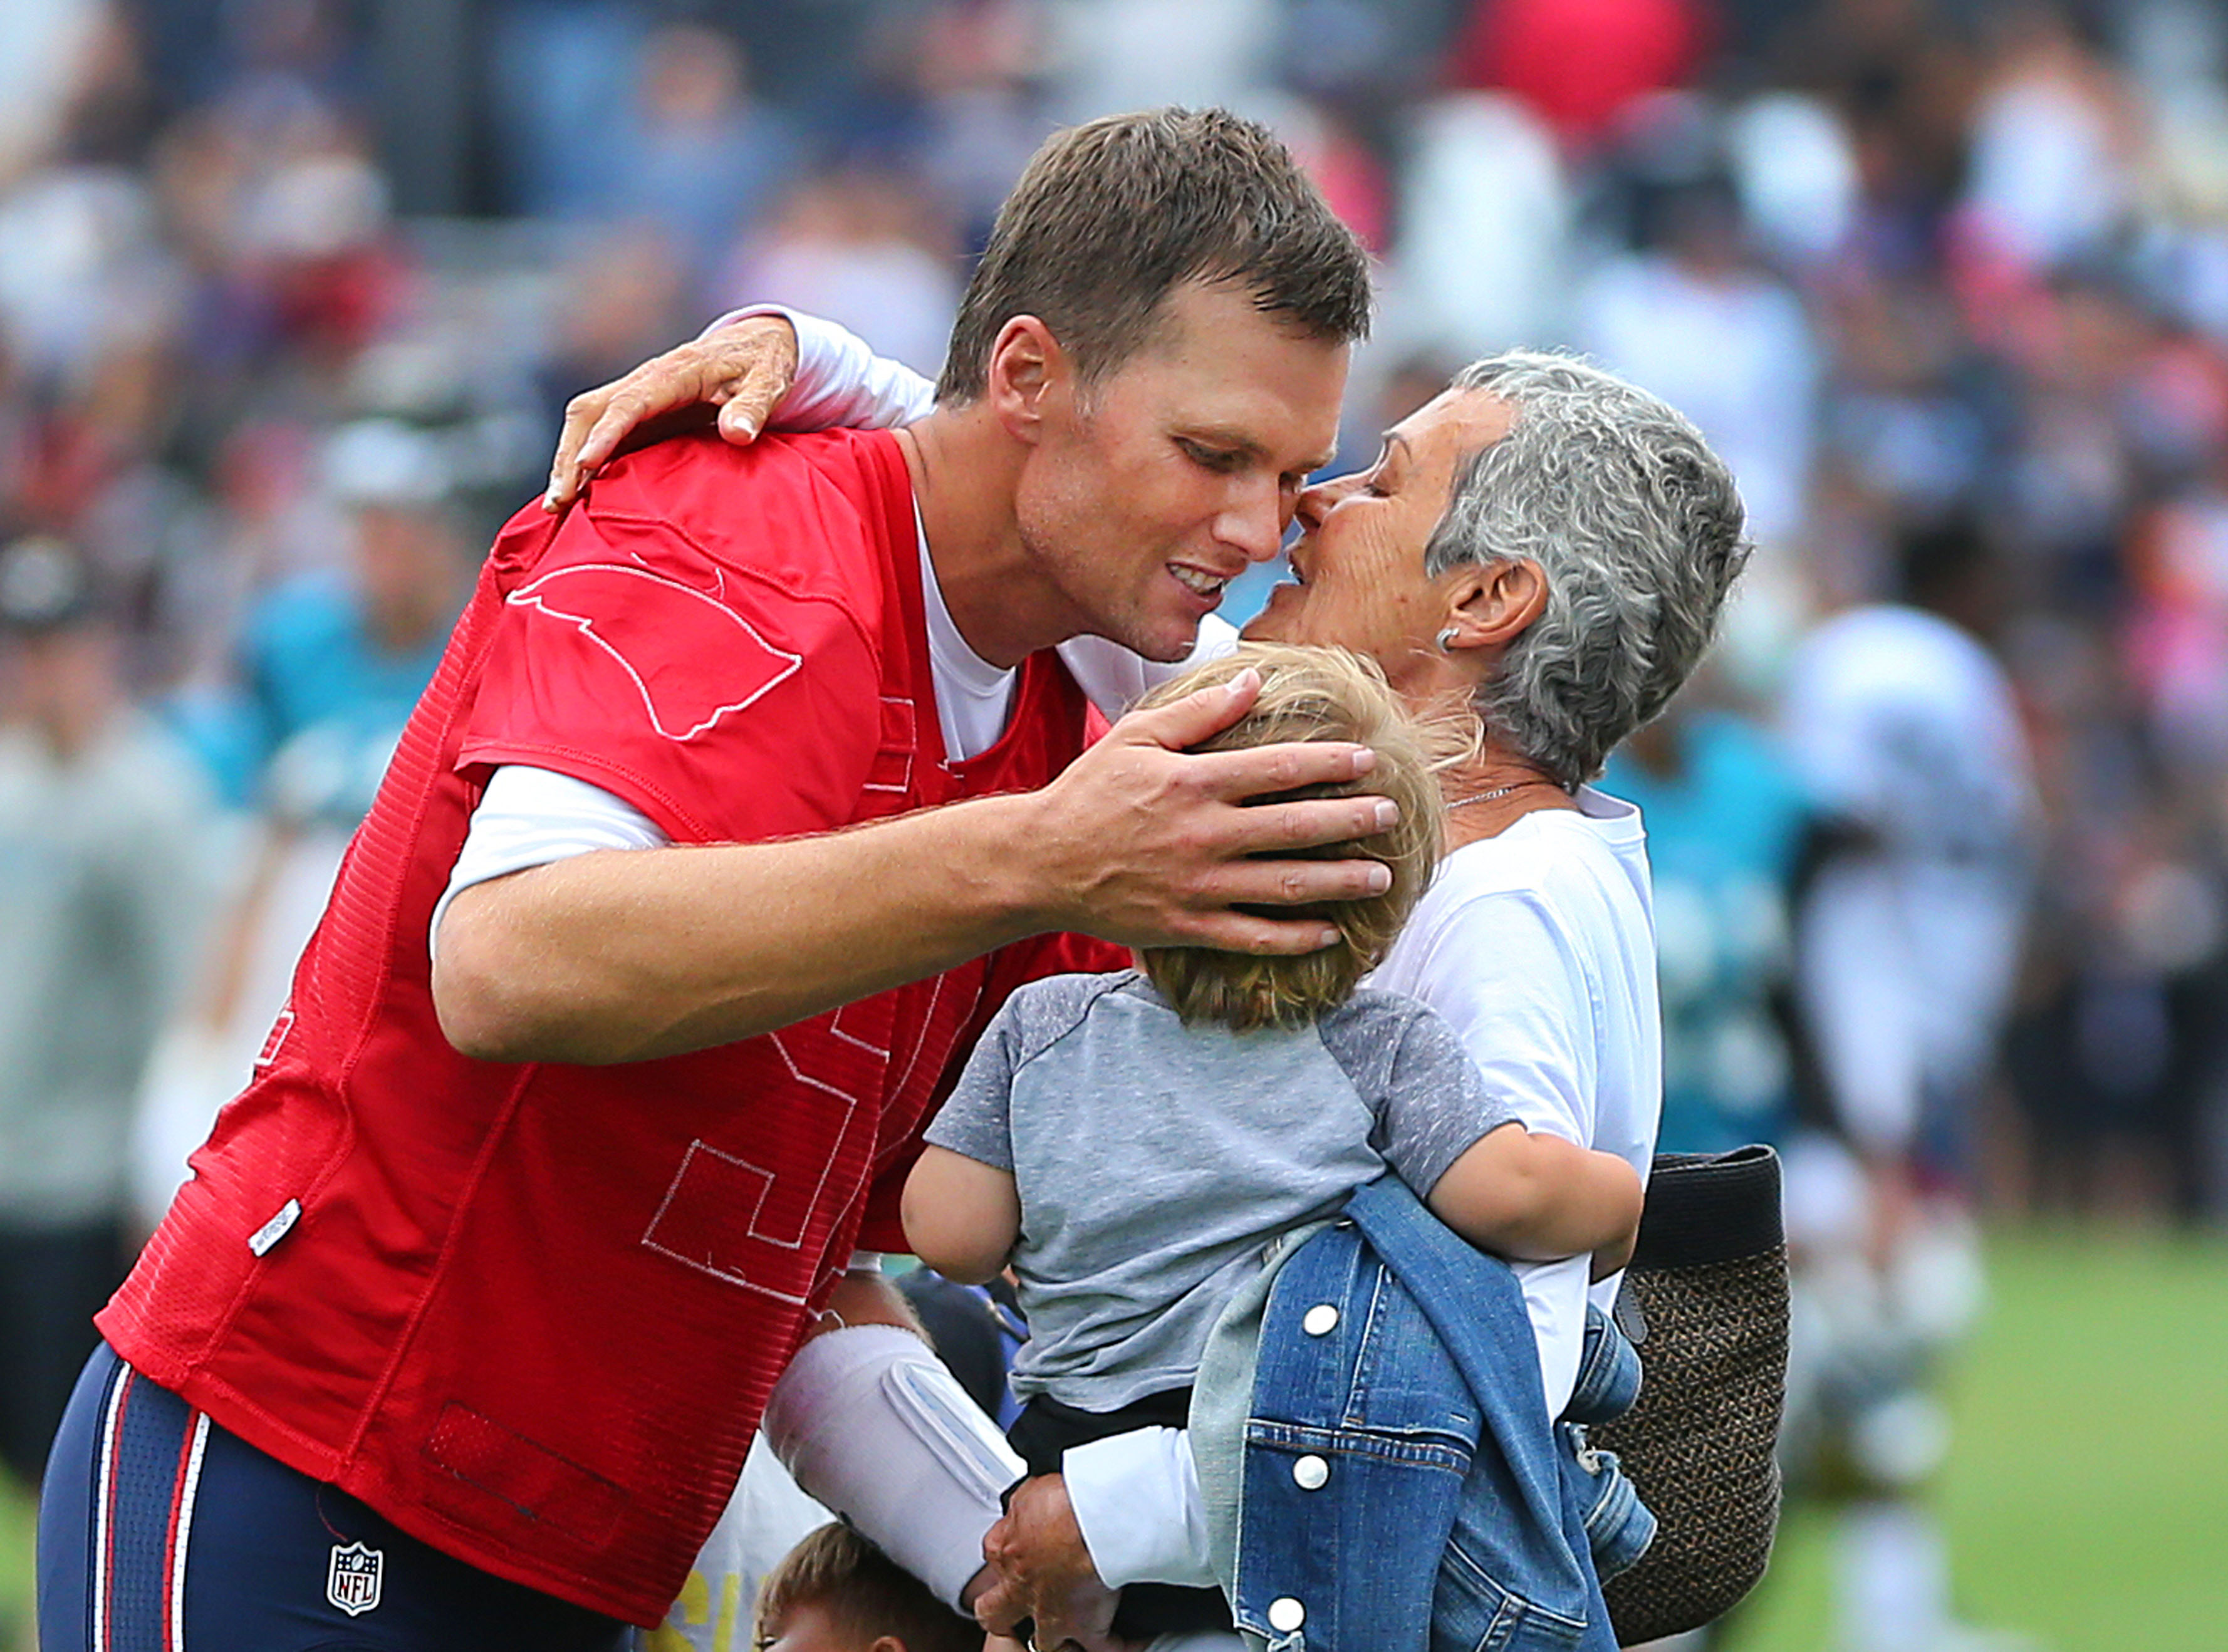 Tom Brady with his mother and nephew at the Gillette Stadium practice field in Foxborough, Massachusetts on August 8, 2017. | Source: Getty Images